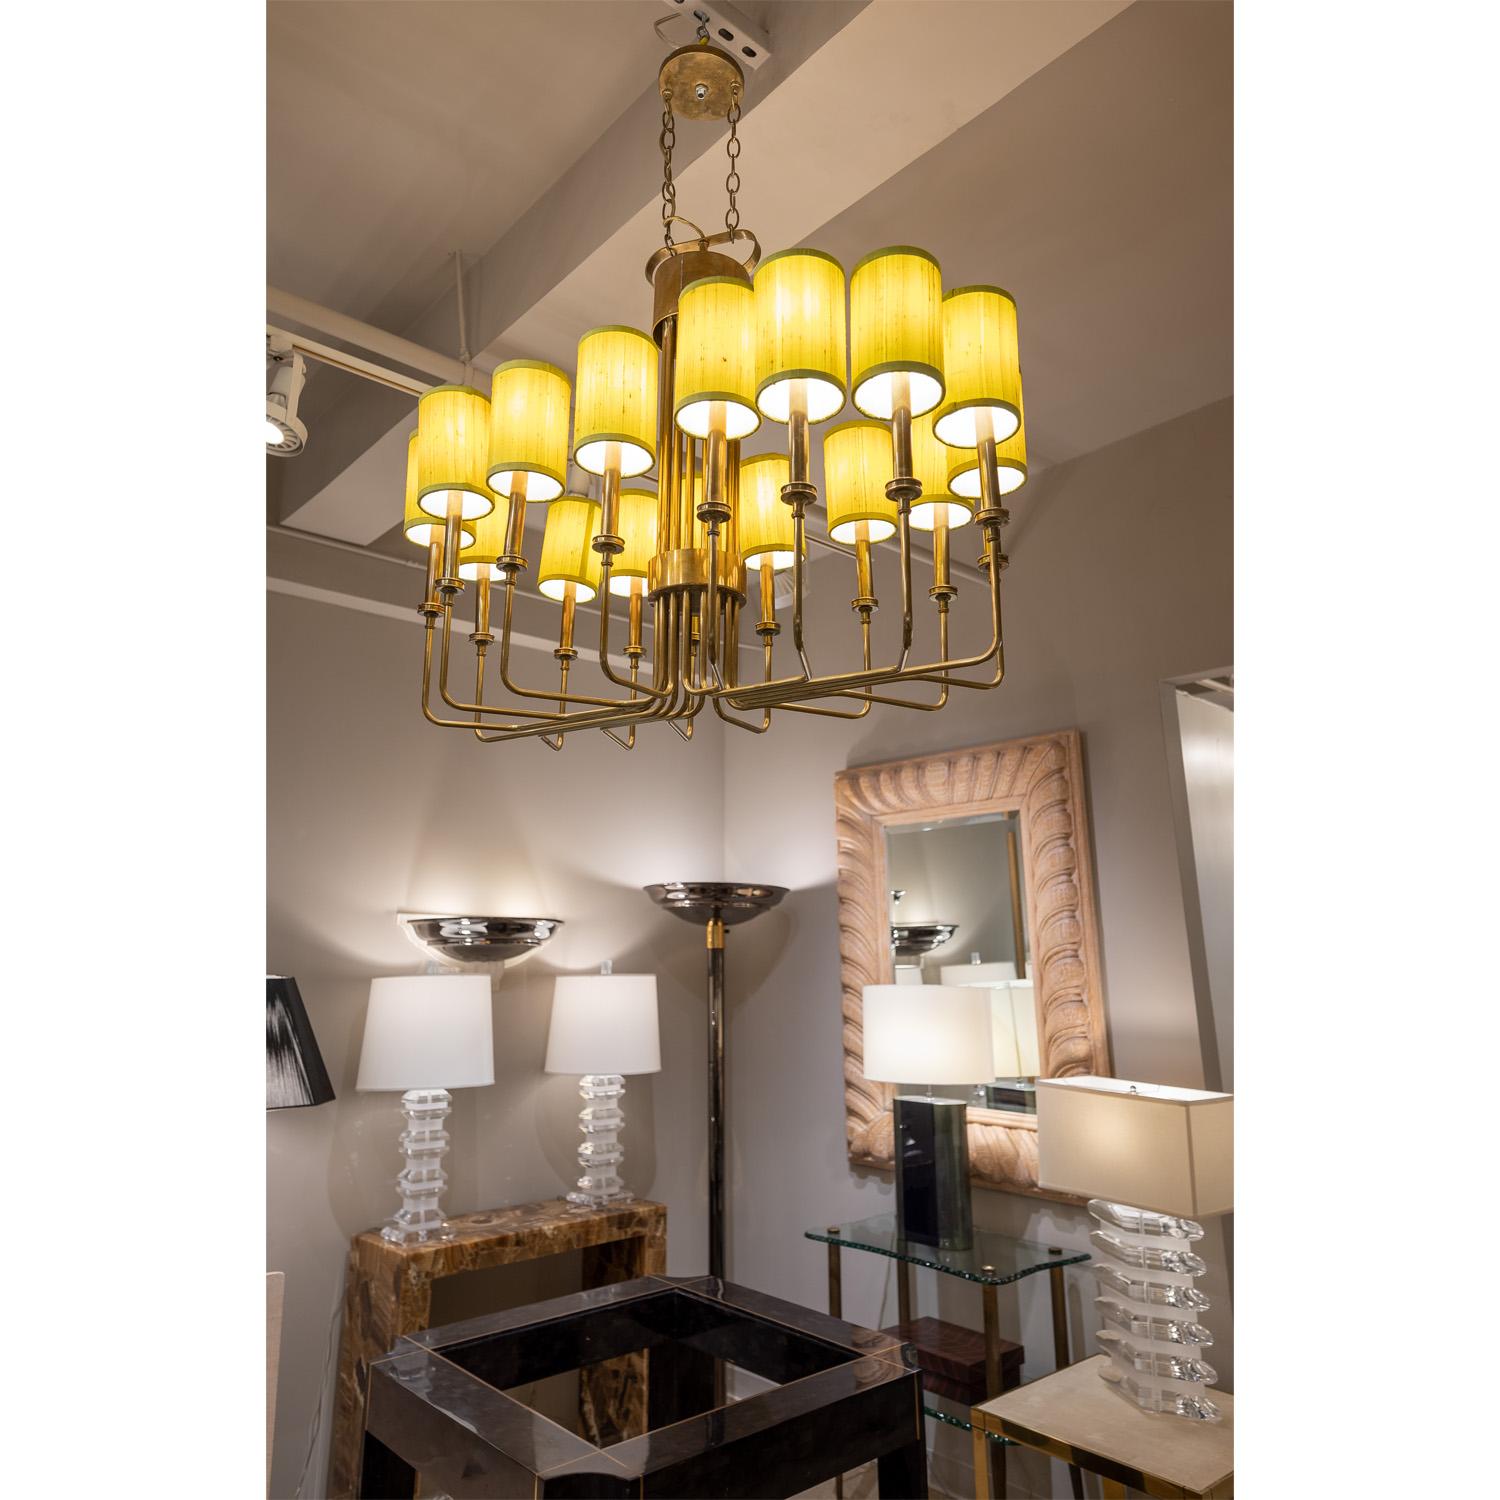 Parzinger Style Large and Impressive Chandelier in Brass, 1950s For Sale 1